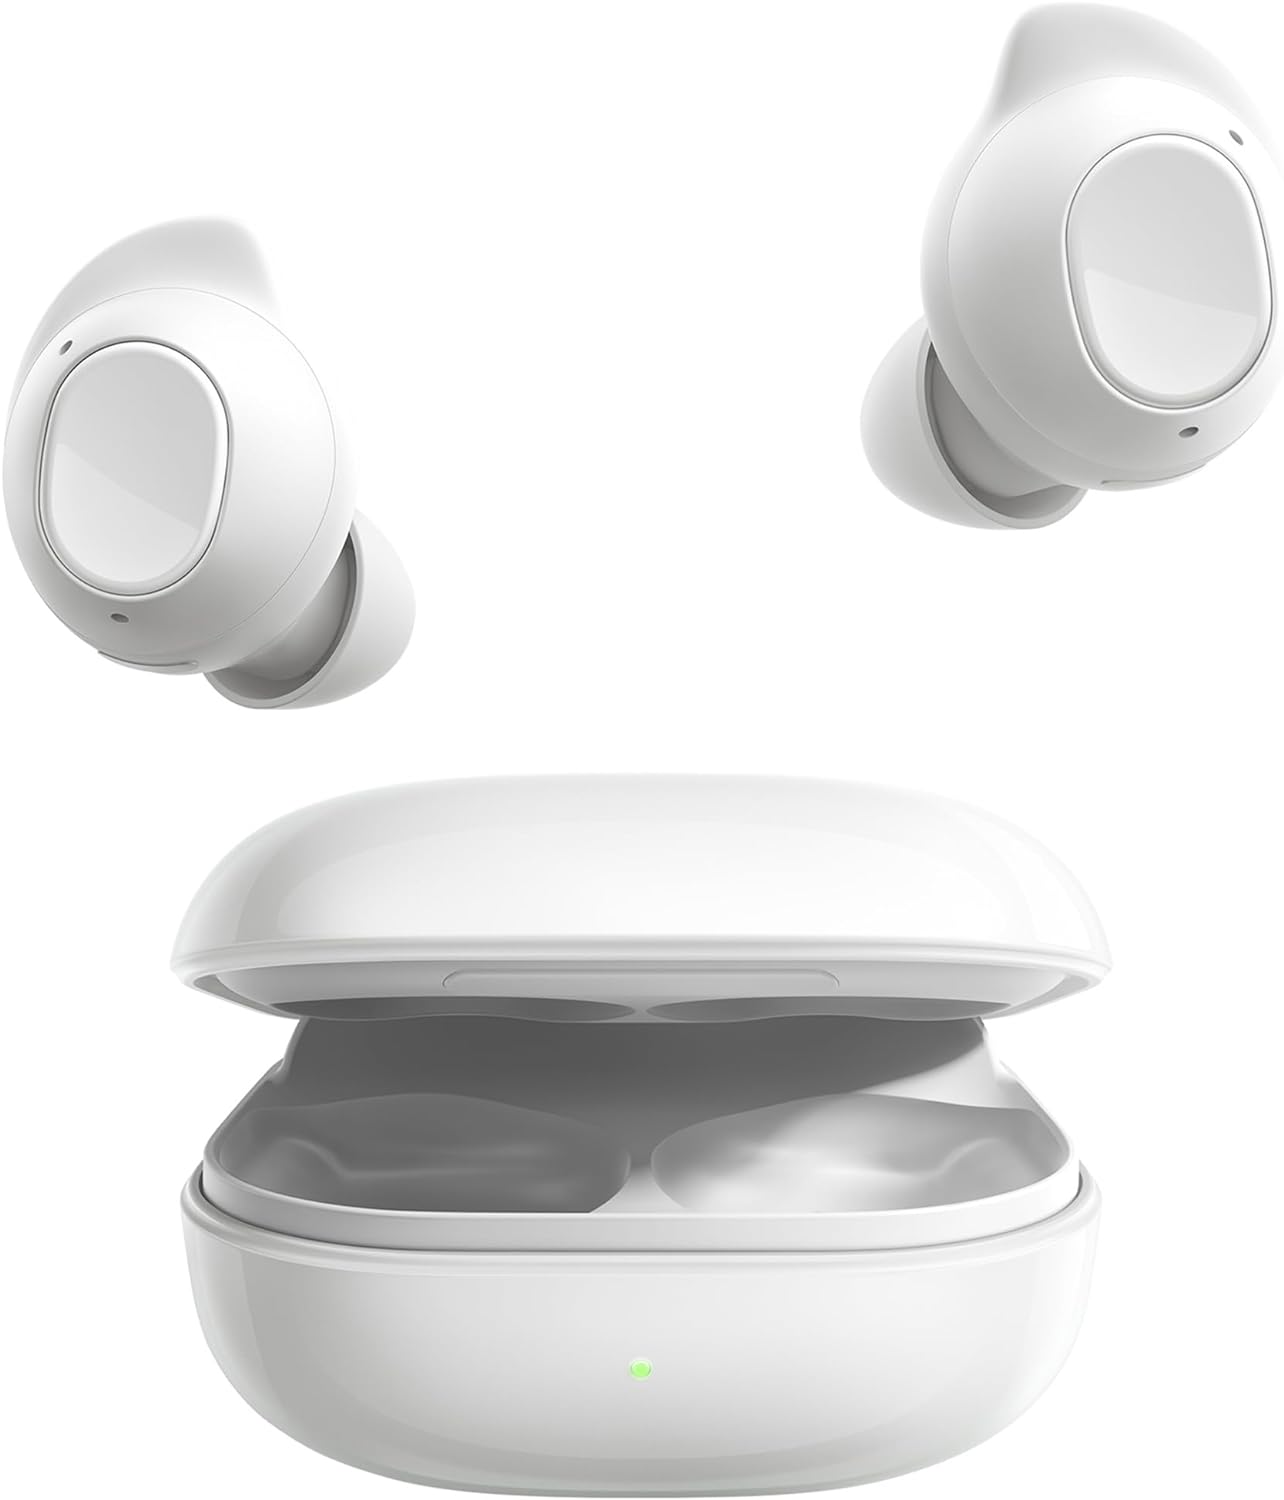 The image shows a pair of Galaxy Buds FE earbuds and their charging case. The earbuds appear to be a modern design and are likely Bluetooth-enabled for connecting to various devices like smartphones, tablets, or computers. The charging case is open, depicting the area where the earbuds are stored and charged. There's a visible LED indicator on the case which usually signals the battery status or charging status. The design is sleek and the color of the set is white.